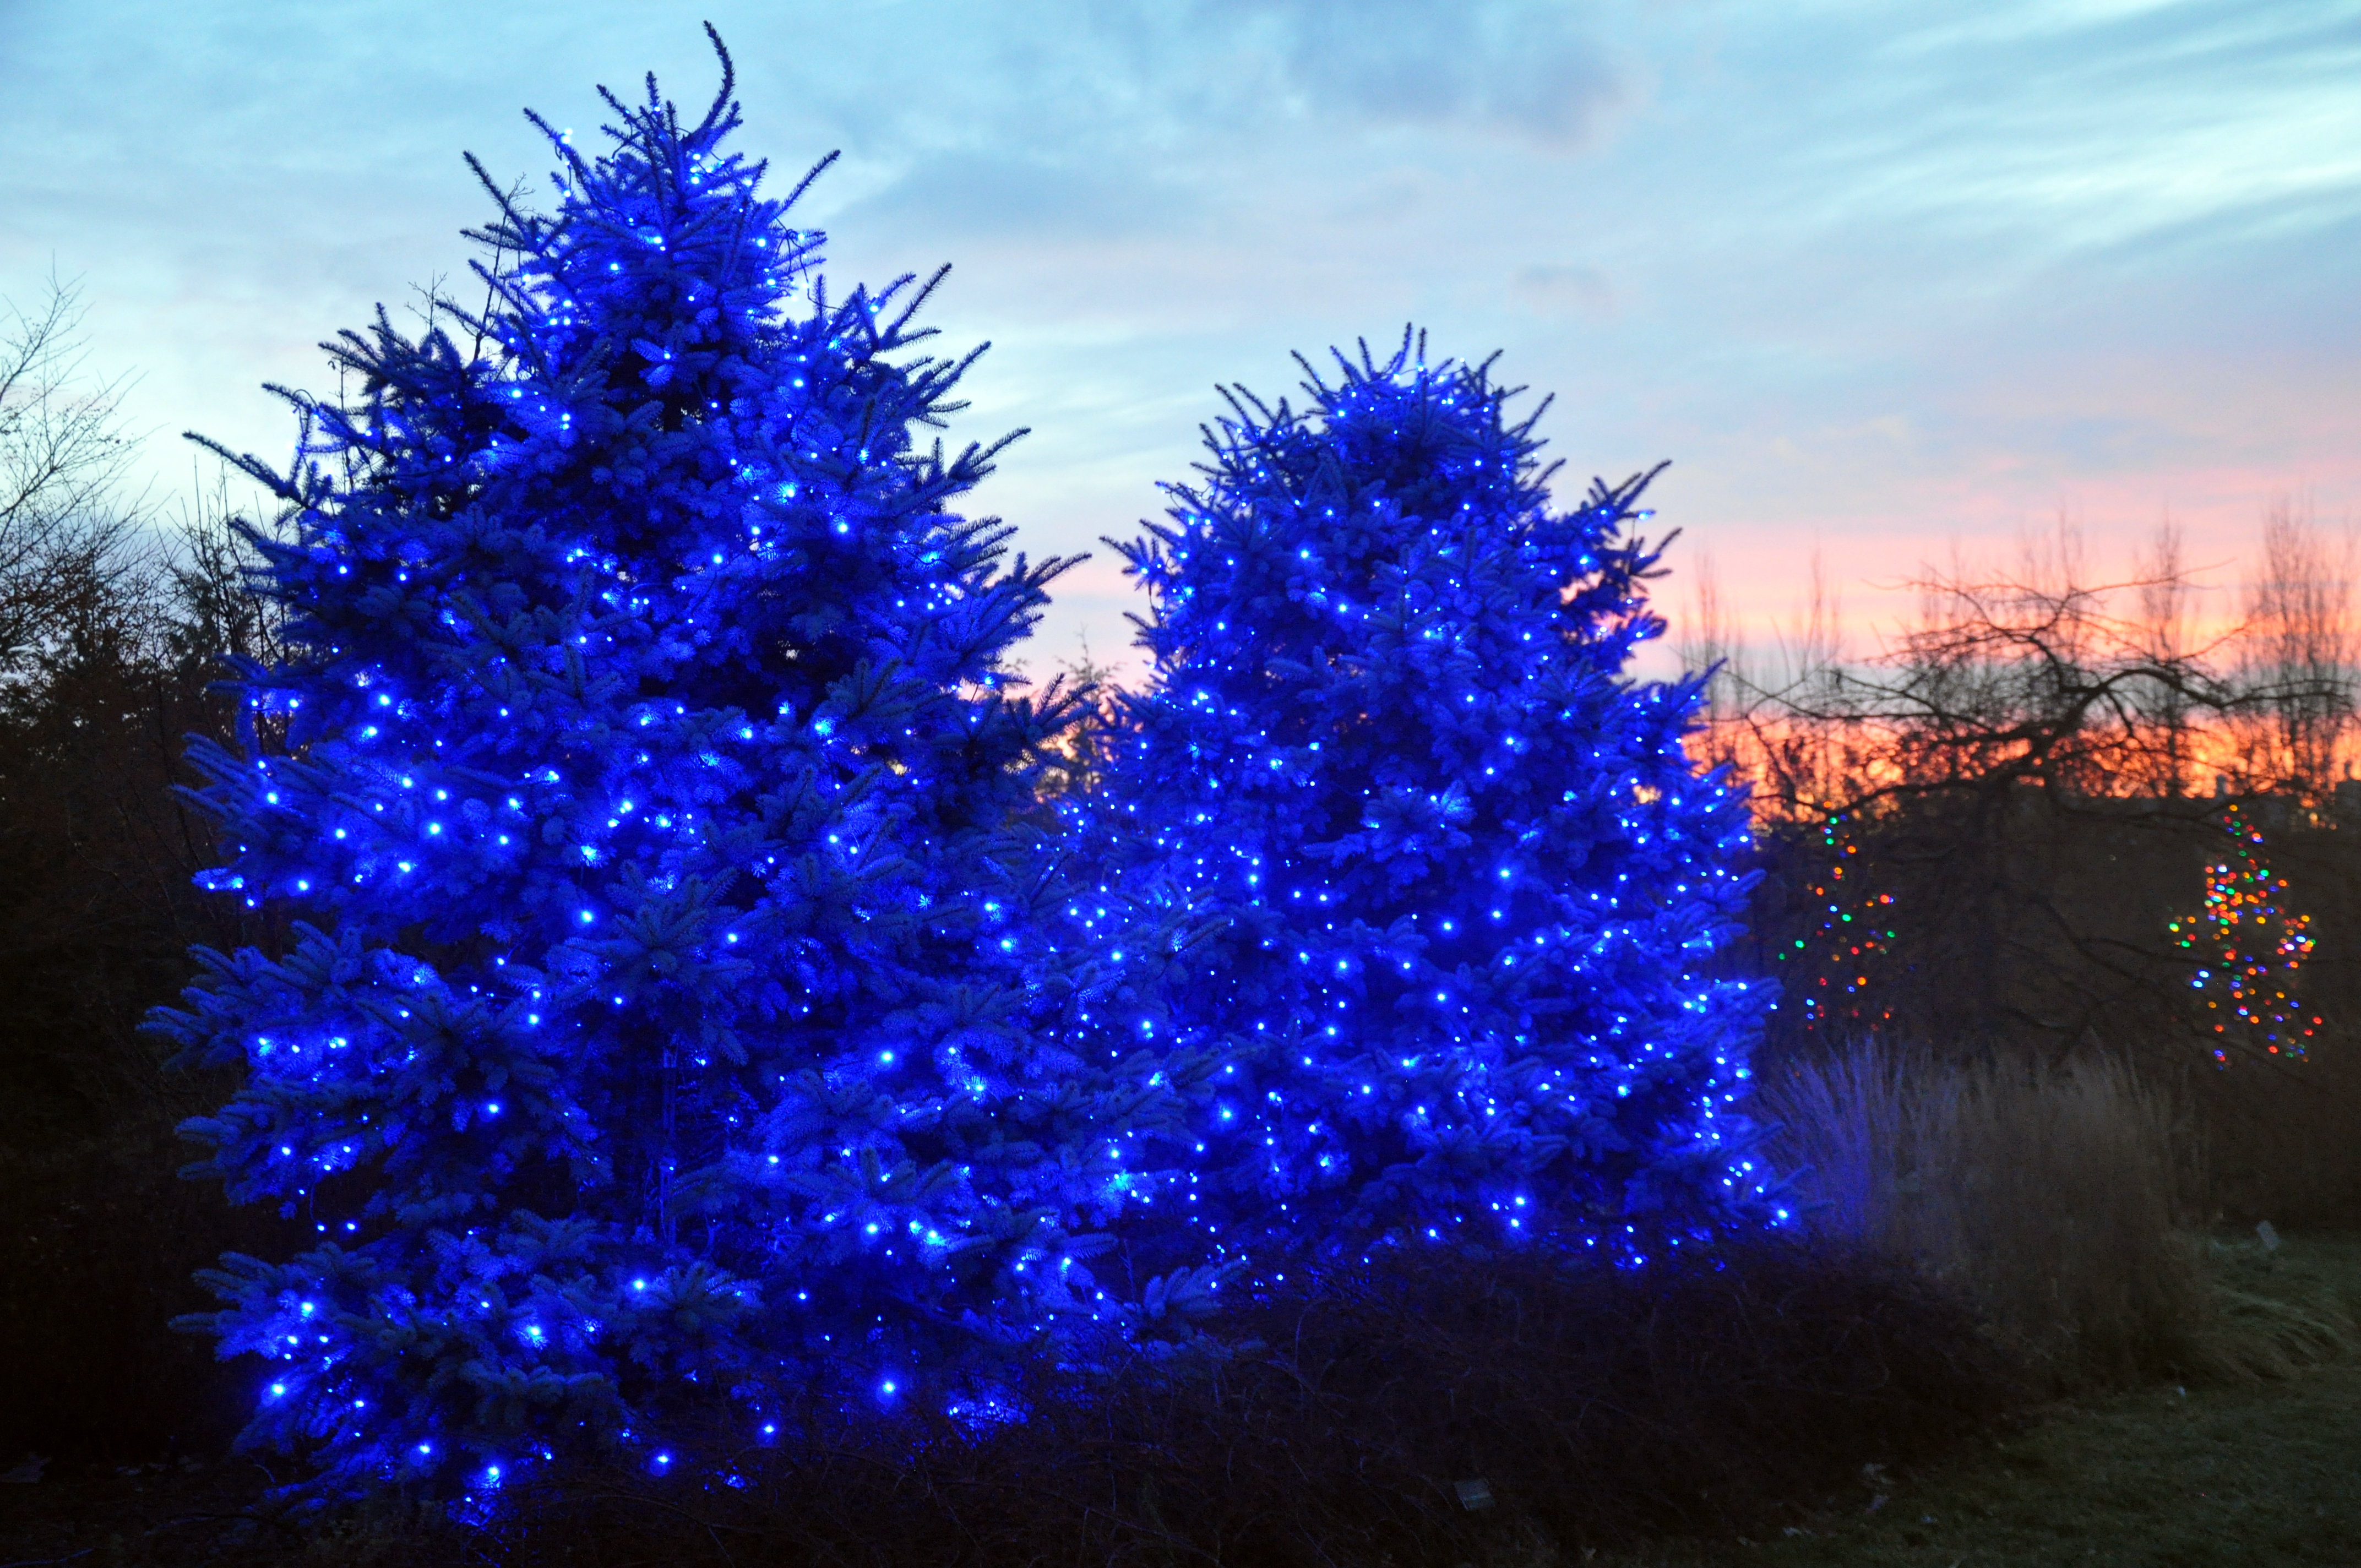 12 2015 - Lighted trees on Strolling Garden path